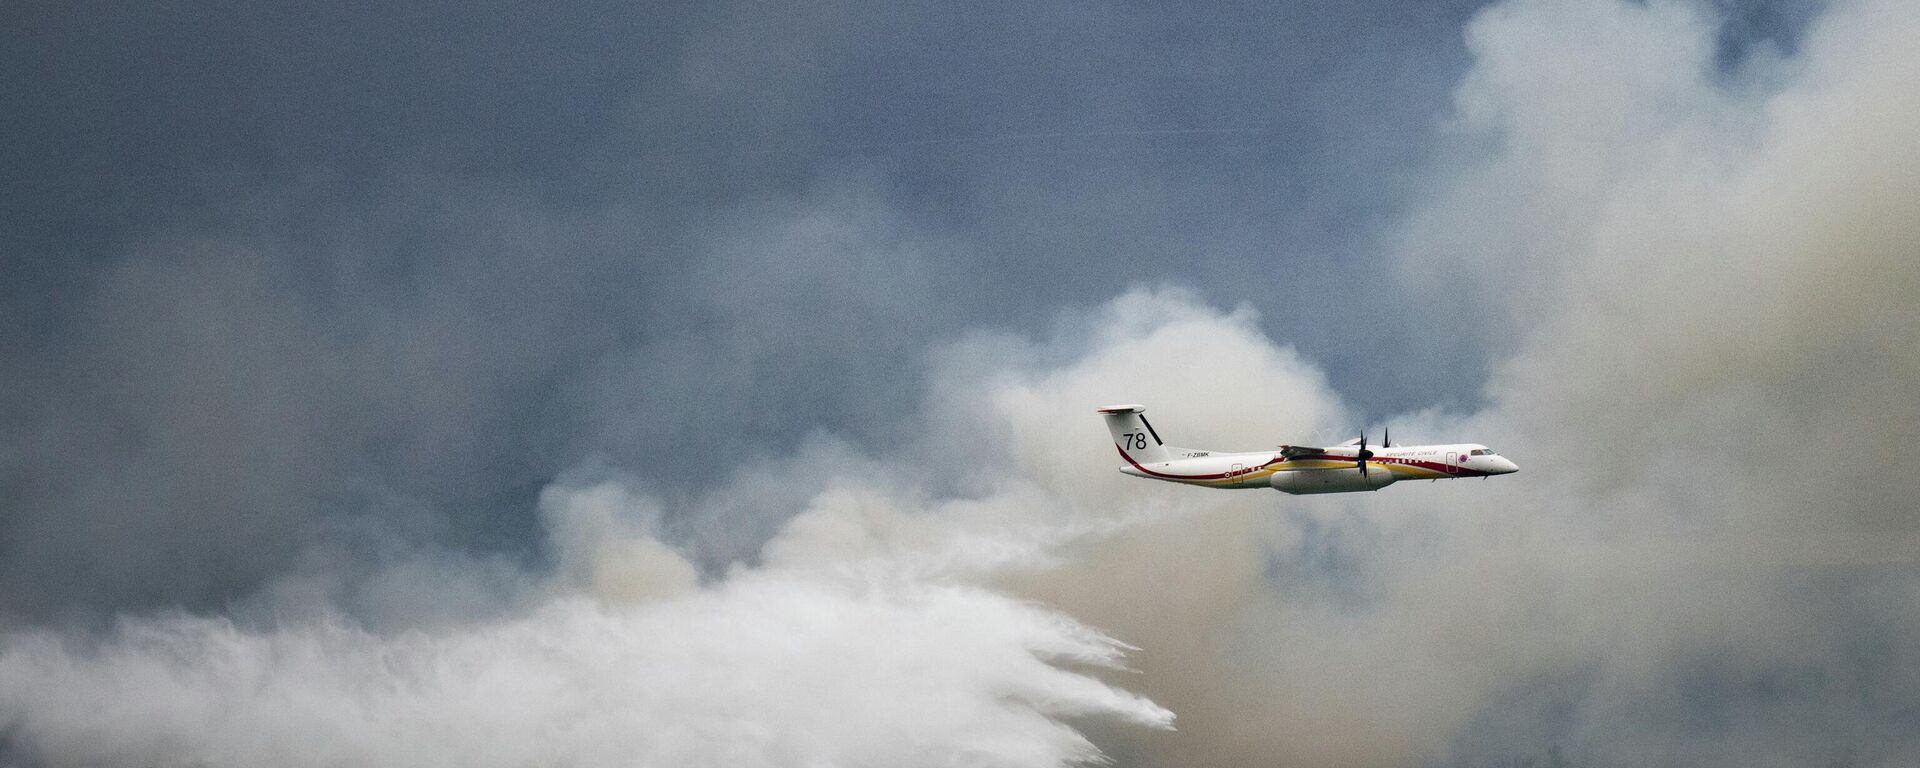 A De Havilland Canada Dash 8-400 MR aircraft drops water over a wildfire raging in the Monts d'Arree, near Brennilis, Brittany, on July 20, 2022. - Sputnik International, 1920, 20.07.2022